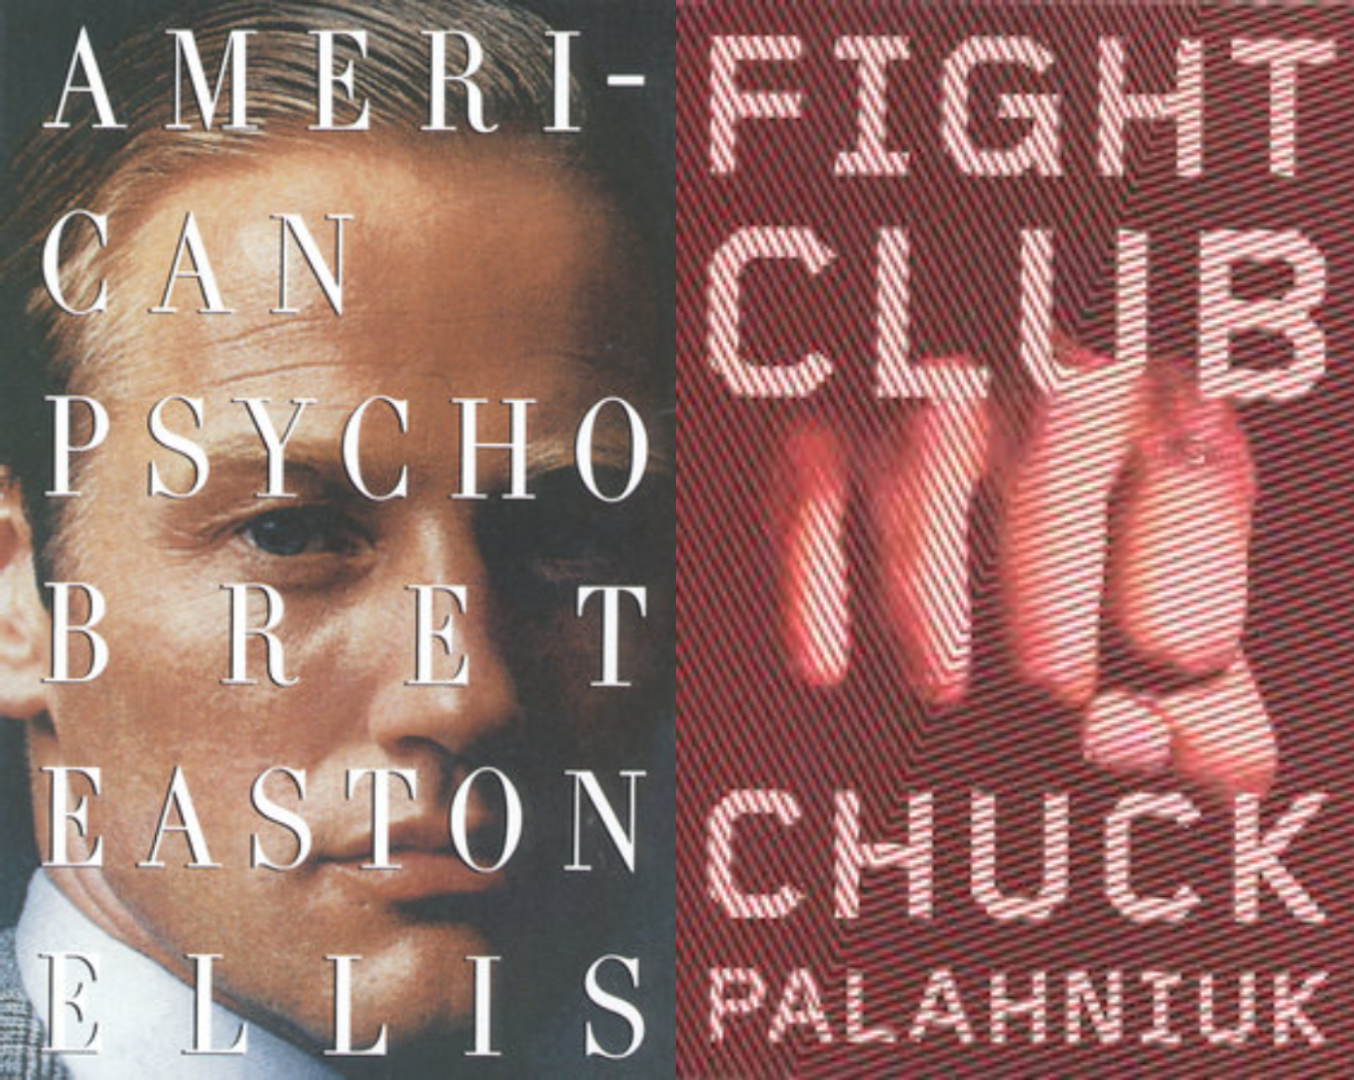 American Psycho (Book Cover) by Bret Easton Ellis and Fight Club (Book Cover) by Chuck Palahniuk